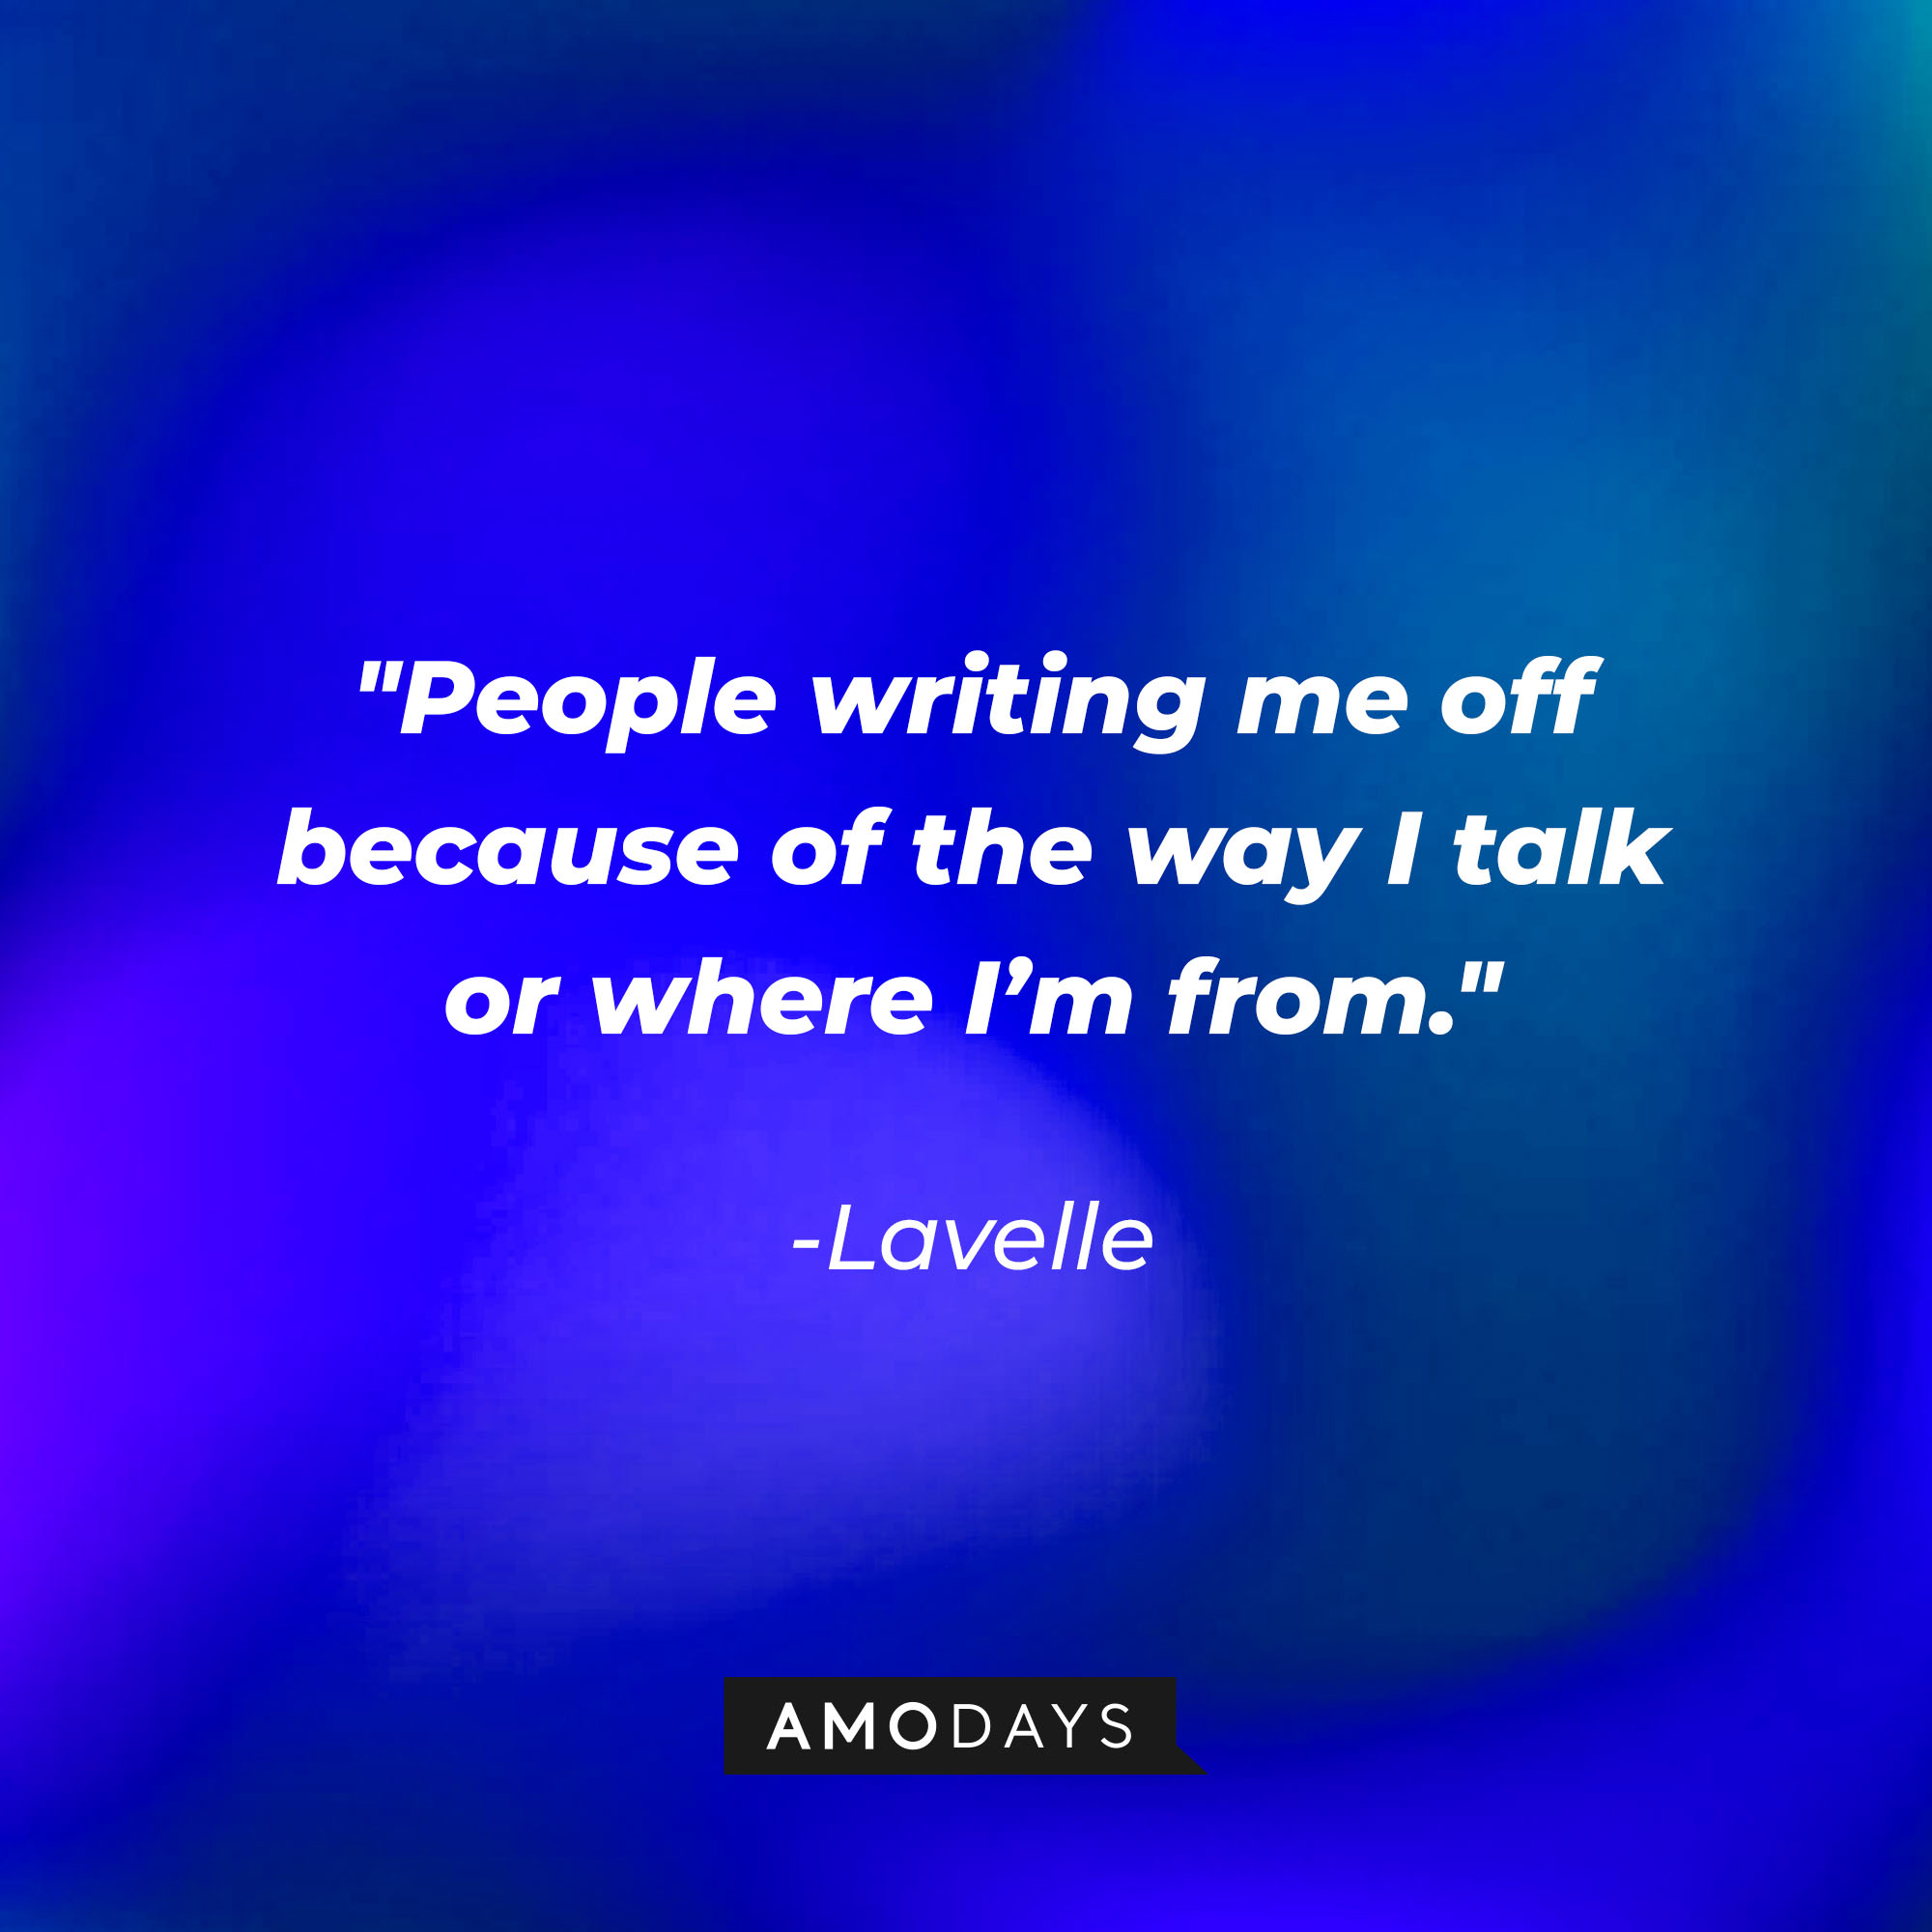 Lavelle’s quote: “People writing me off because of the way I talk or where I’m from." | Source: AmoDays